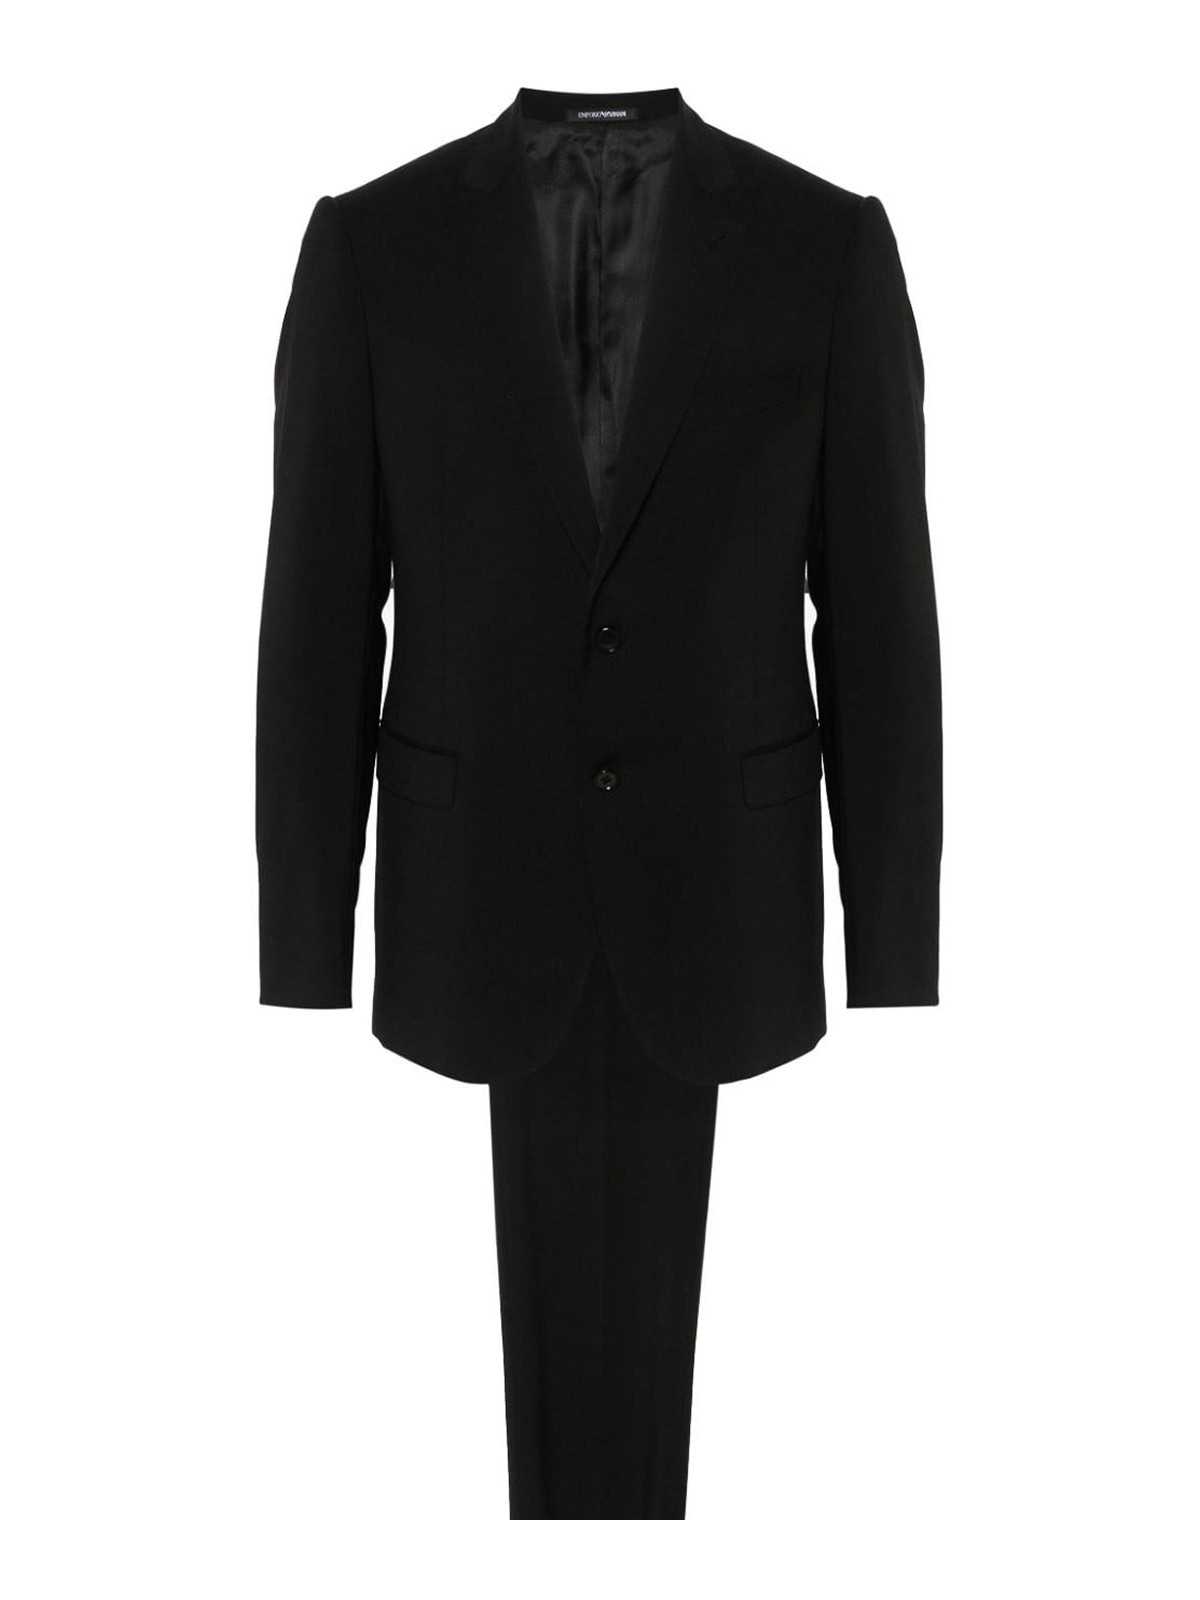 Emporio Armani Wool Single-breasted Suit In Black